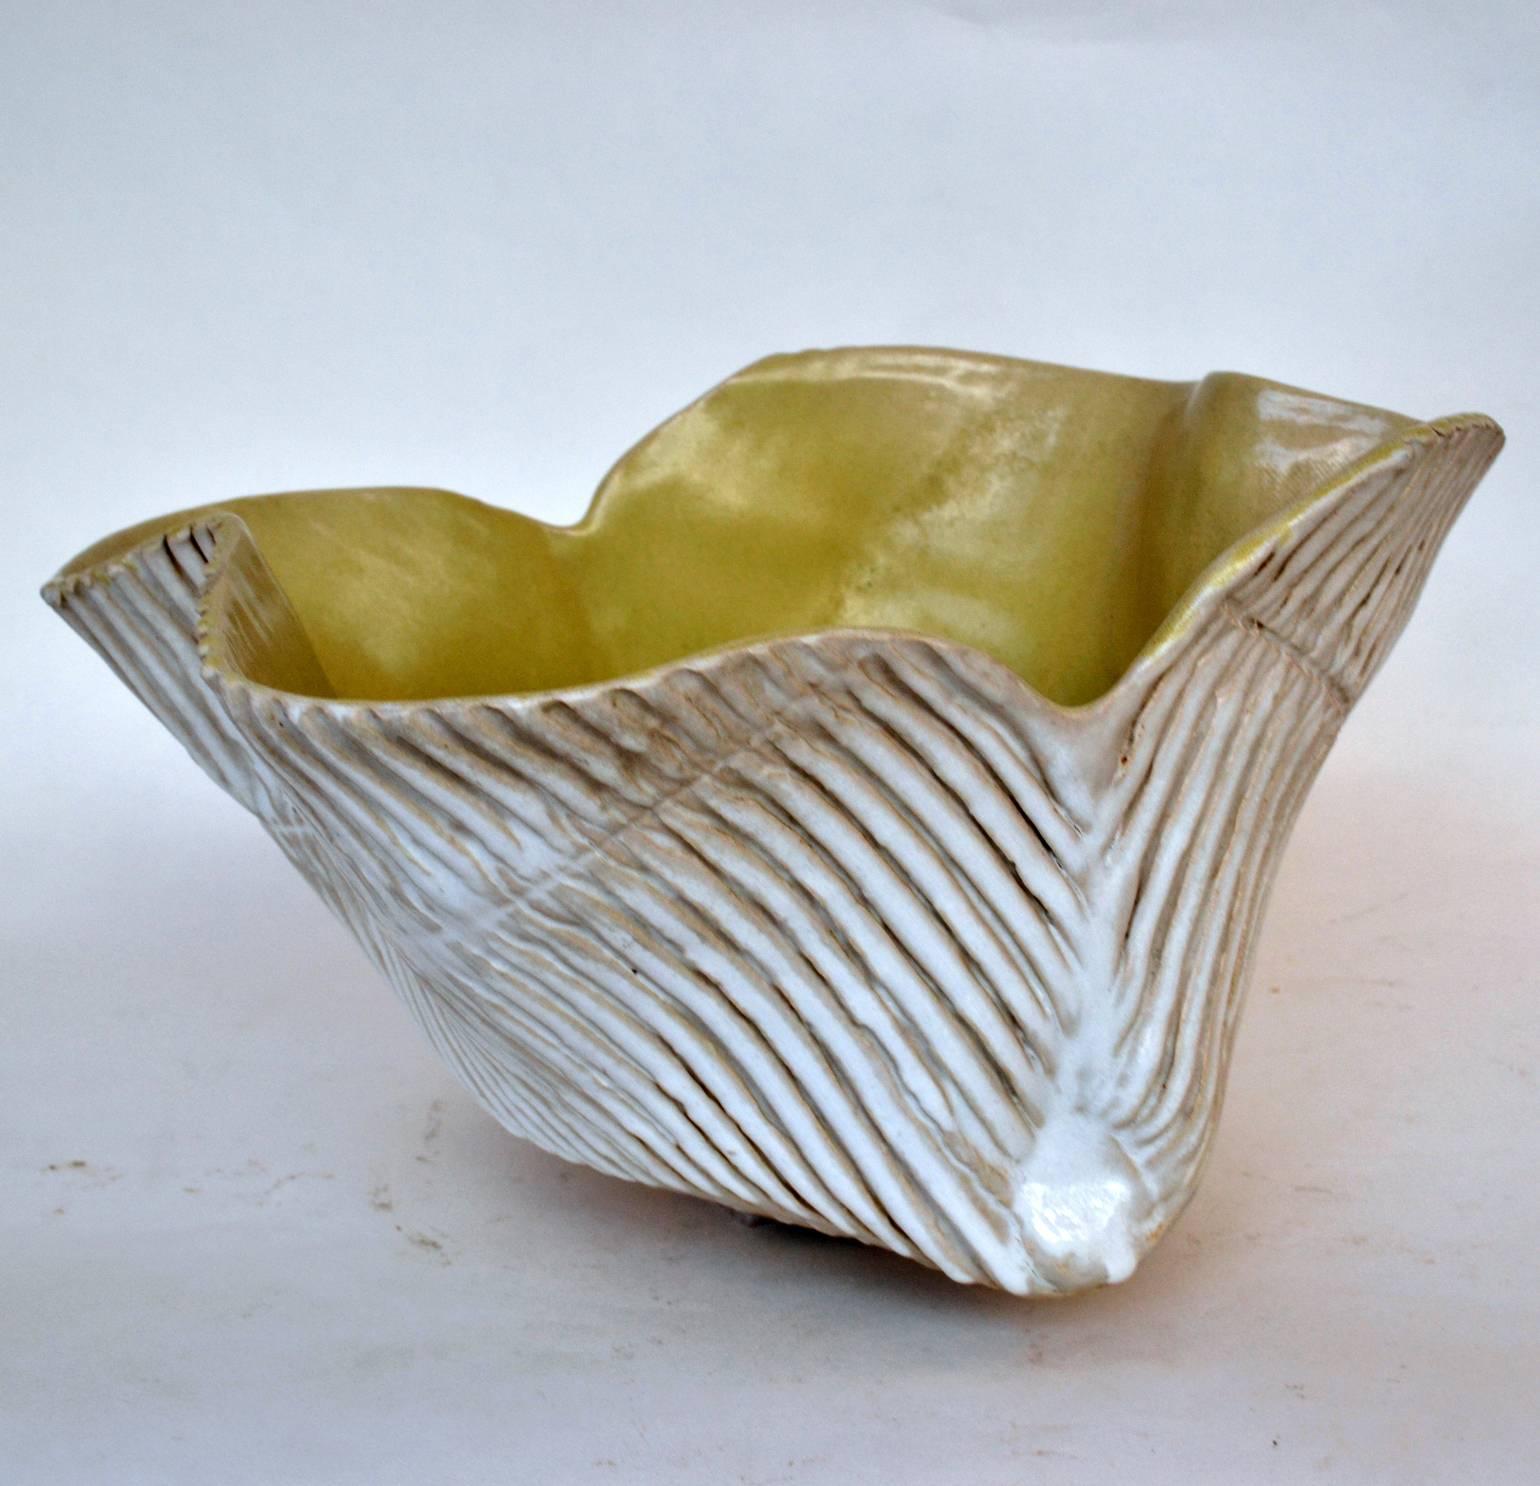 Organic hand formed bowl with ribbed outside is raised on a foot signed with the potters initials.
Inside the glaze is a pale mustard yellow.